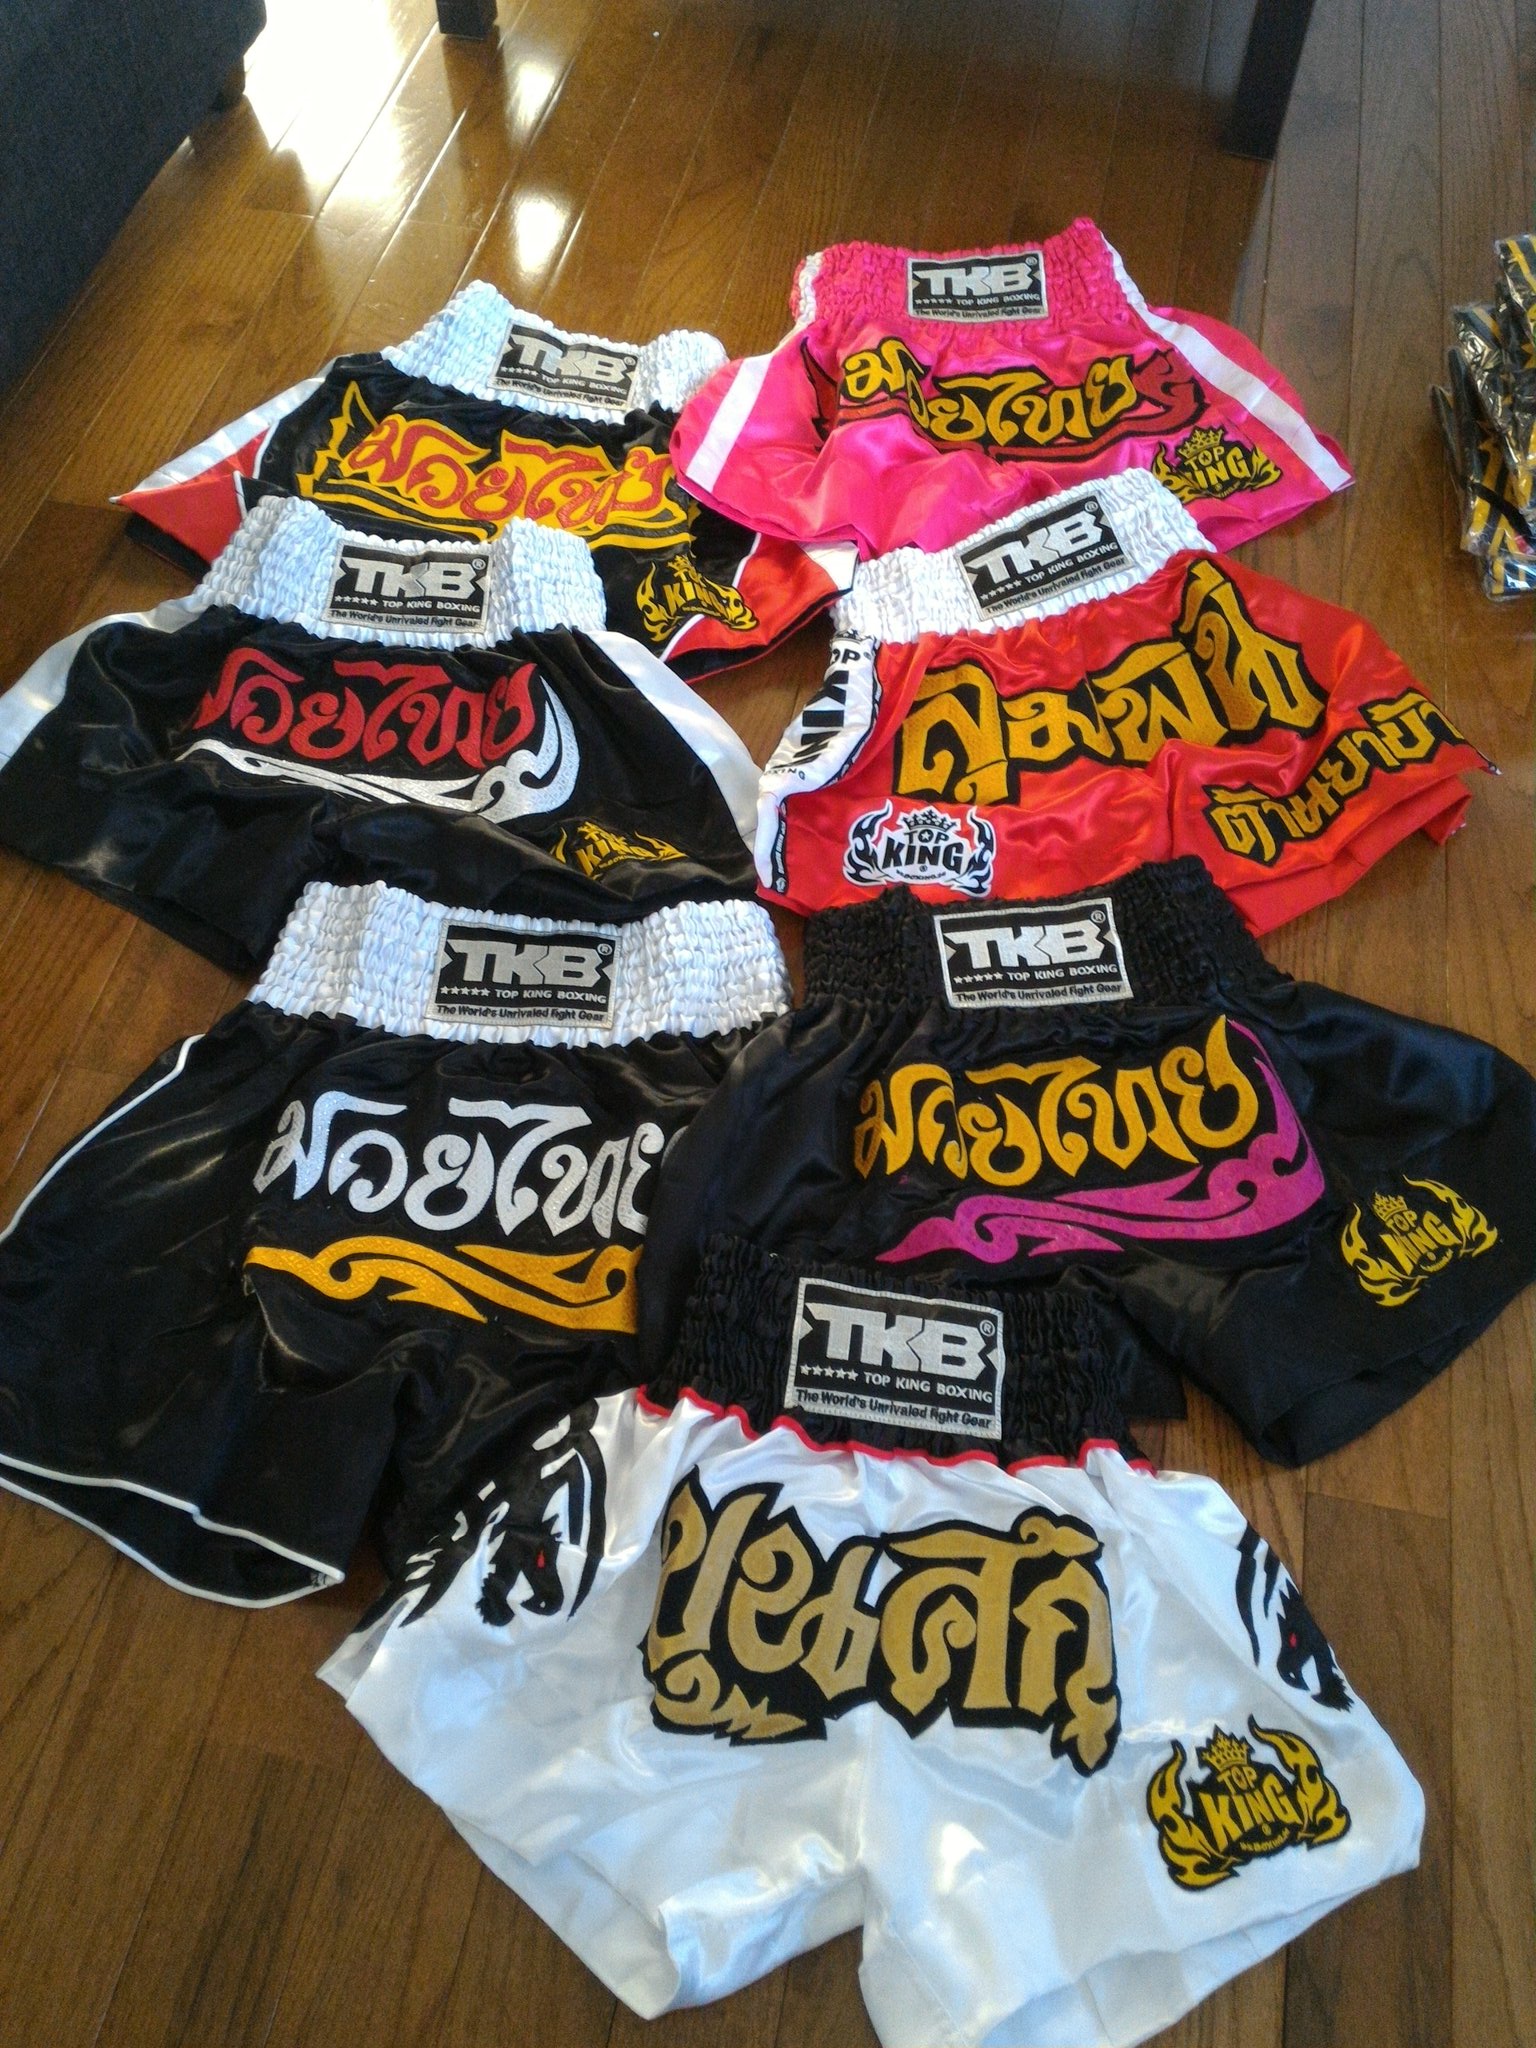 Foto rookie crush Clinch Fight Shop on X: "#topkingboxing Muay Thai shorts are in! To be  added to shop shortly 😉 #muaythai #mmacanada #muaythaicanada #yeg  https://t.co/HD3wA5FH5c" / X